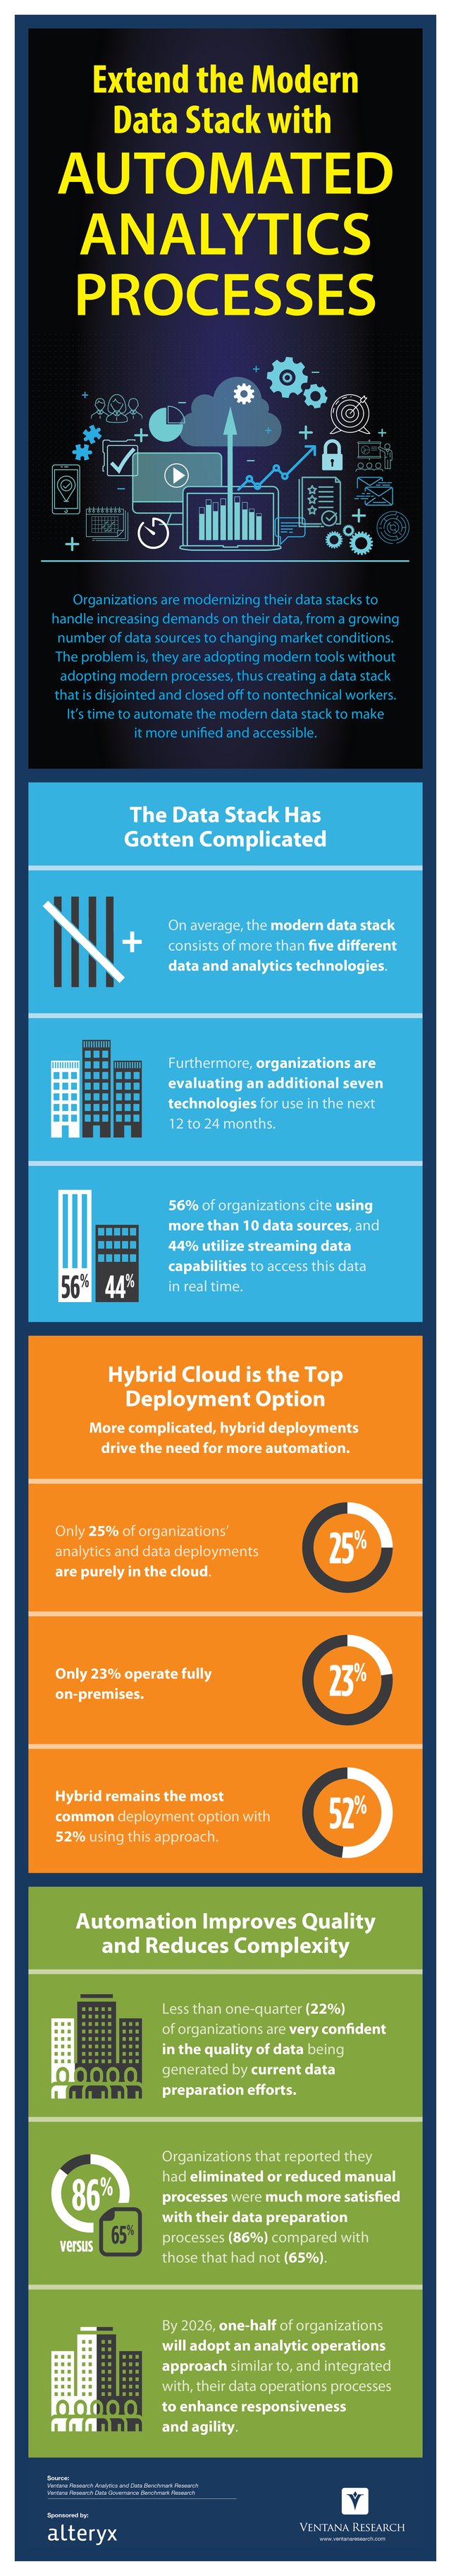 Ventana_Research_Infographic_Avaya_Adopting_Contact_Center_in_the_Cloud.png